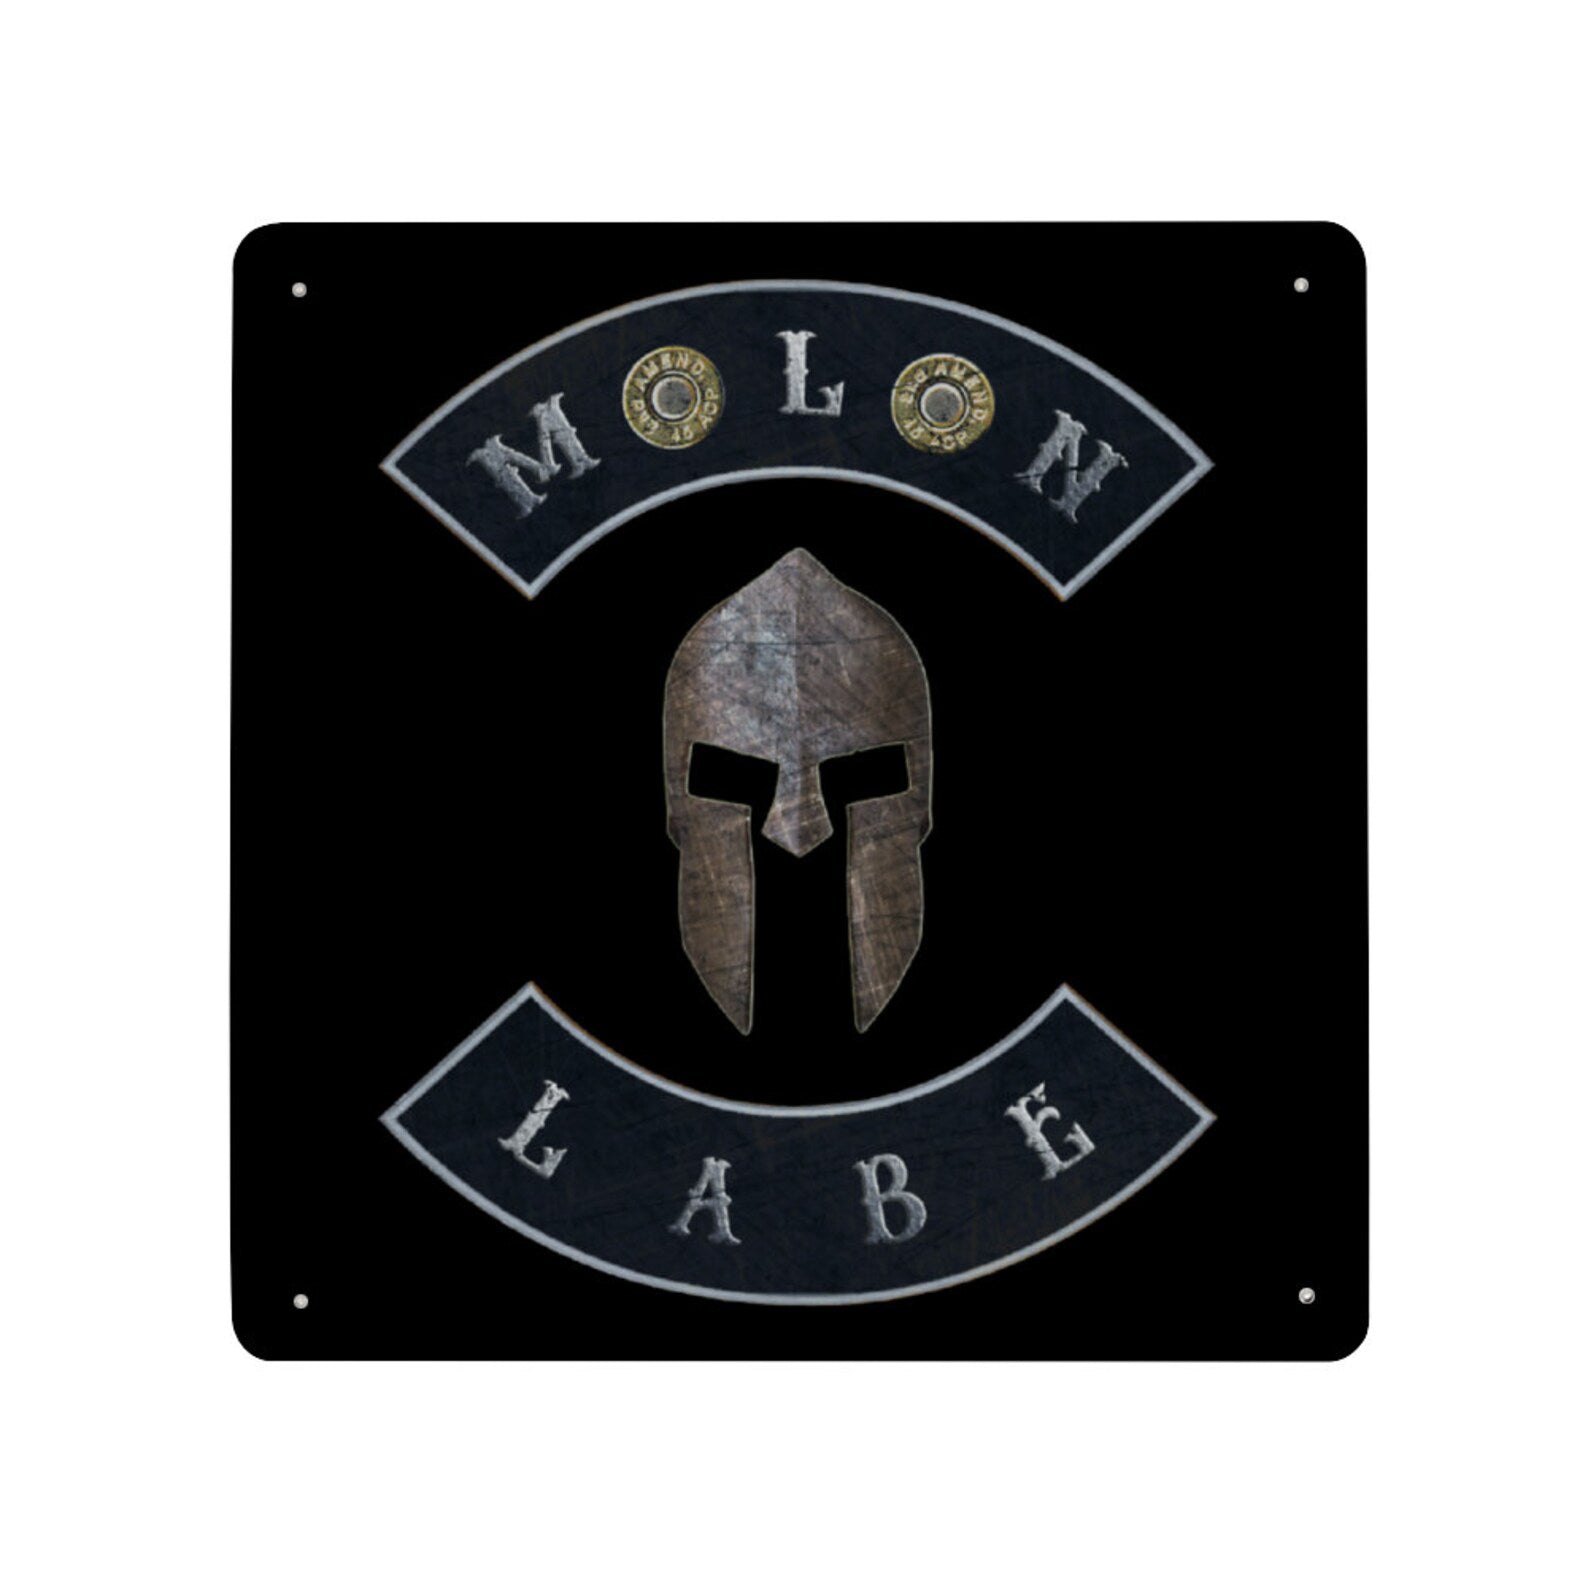 Molon Labe with Spartan Helmet and Double 45 ACP Case Heads Print on Metal